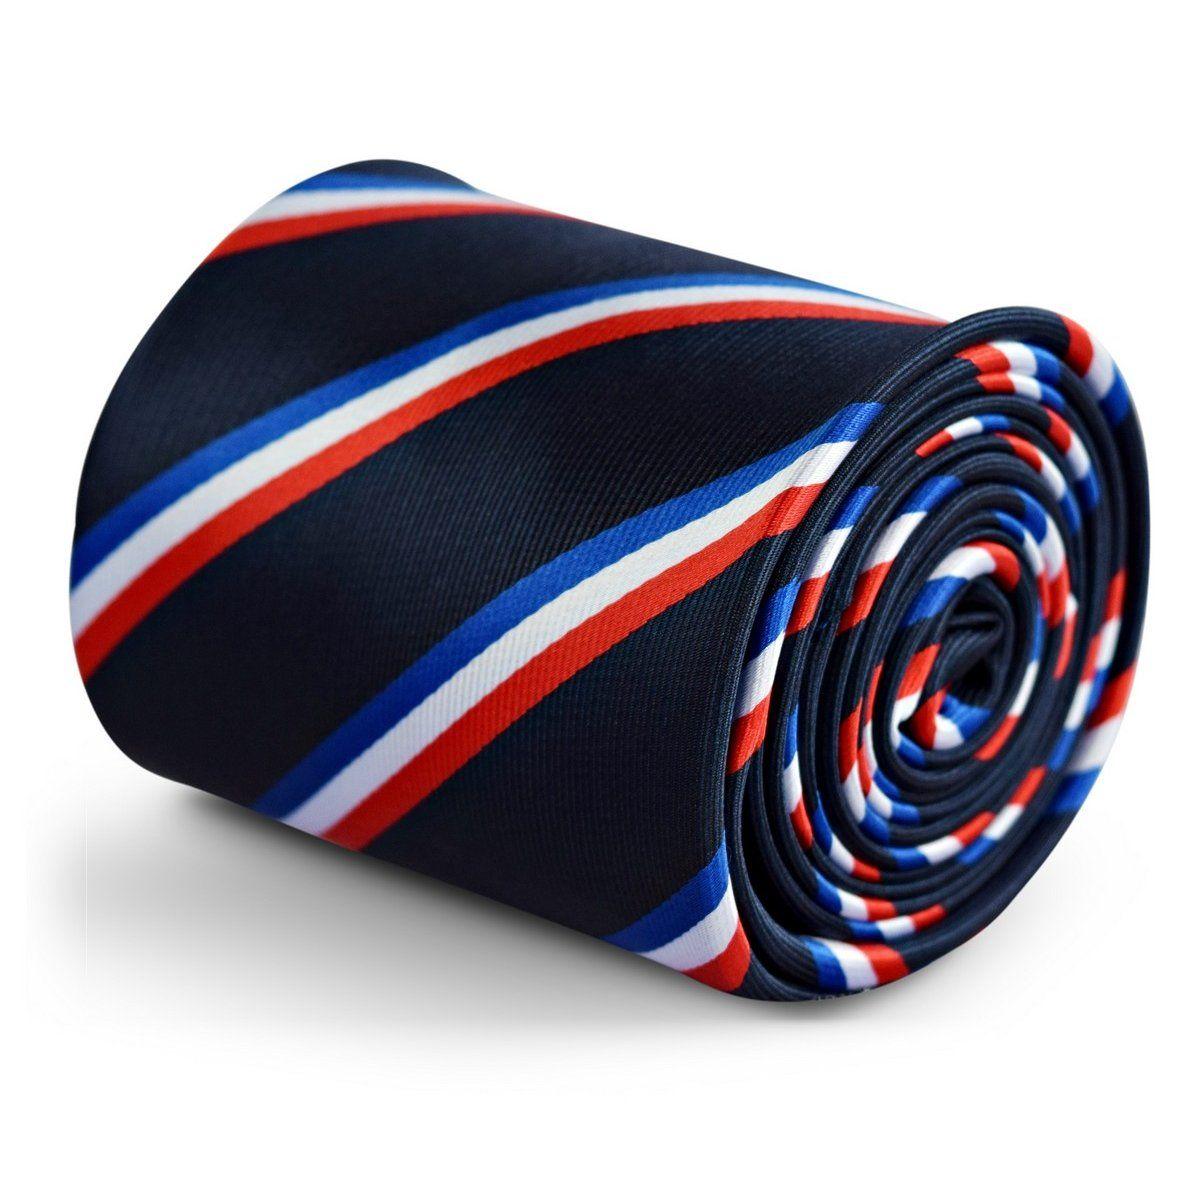 Red White and Blue Stripe Logo - navy tie with French flag red white and blue design